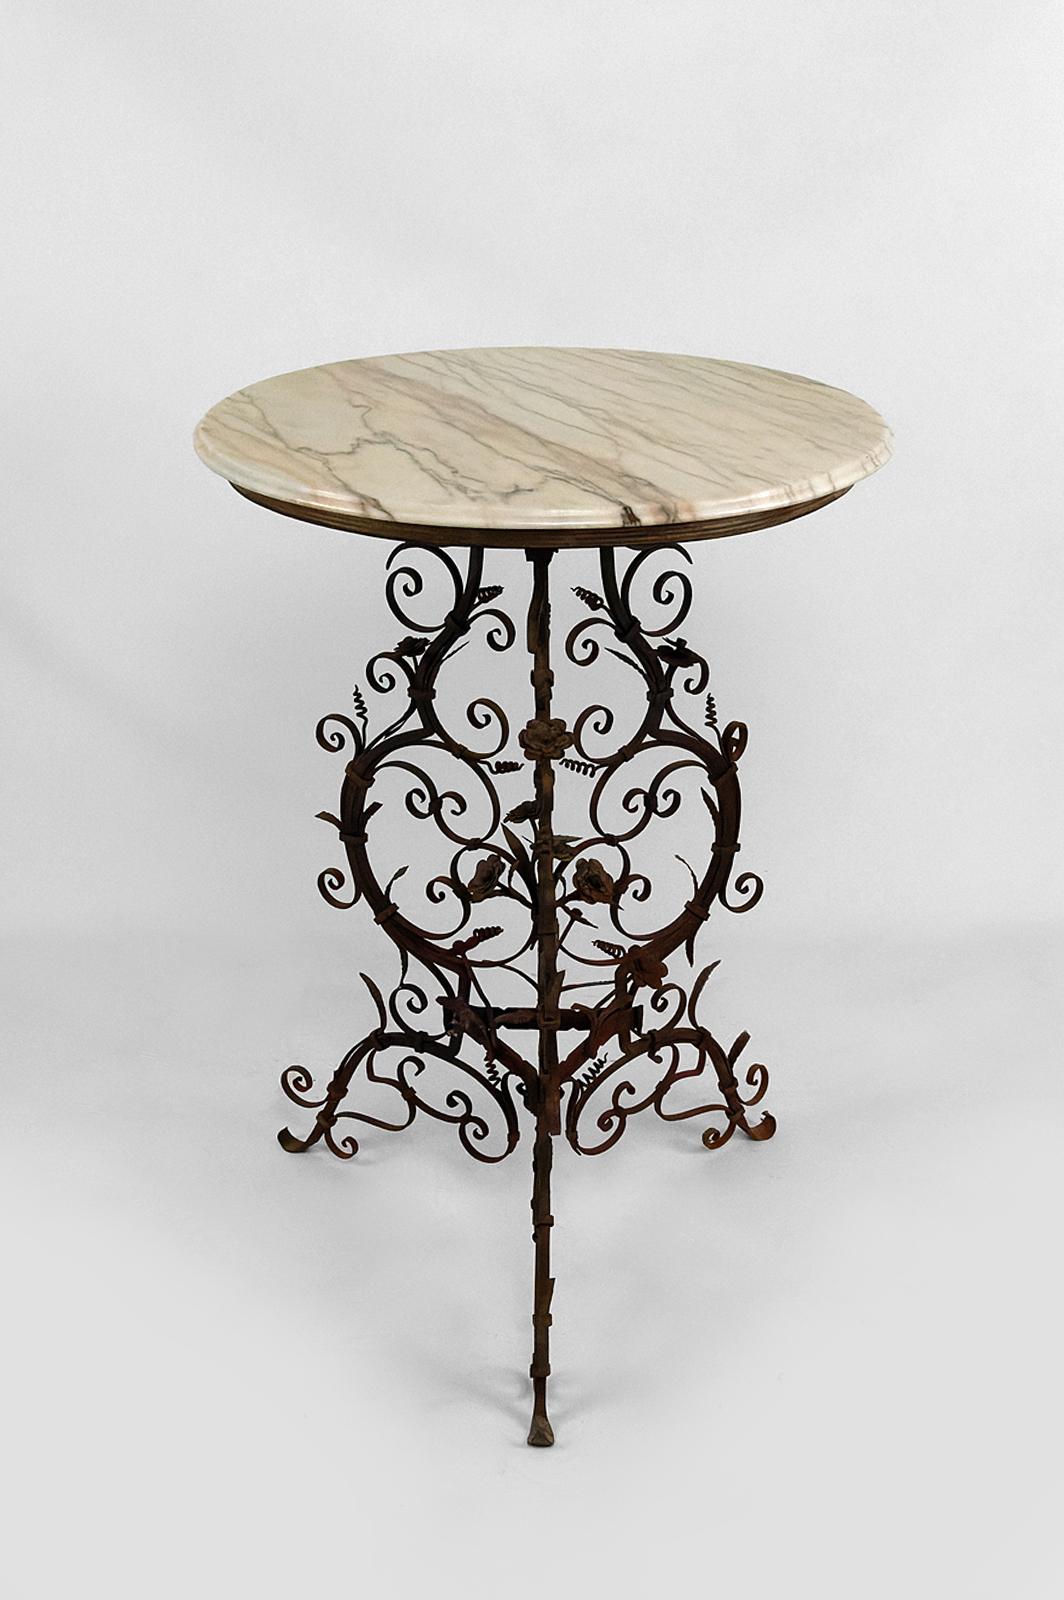 Baroque Wrought iron pedestal table / side table and marble top, Venice, Italy, 17th For Sale